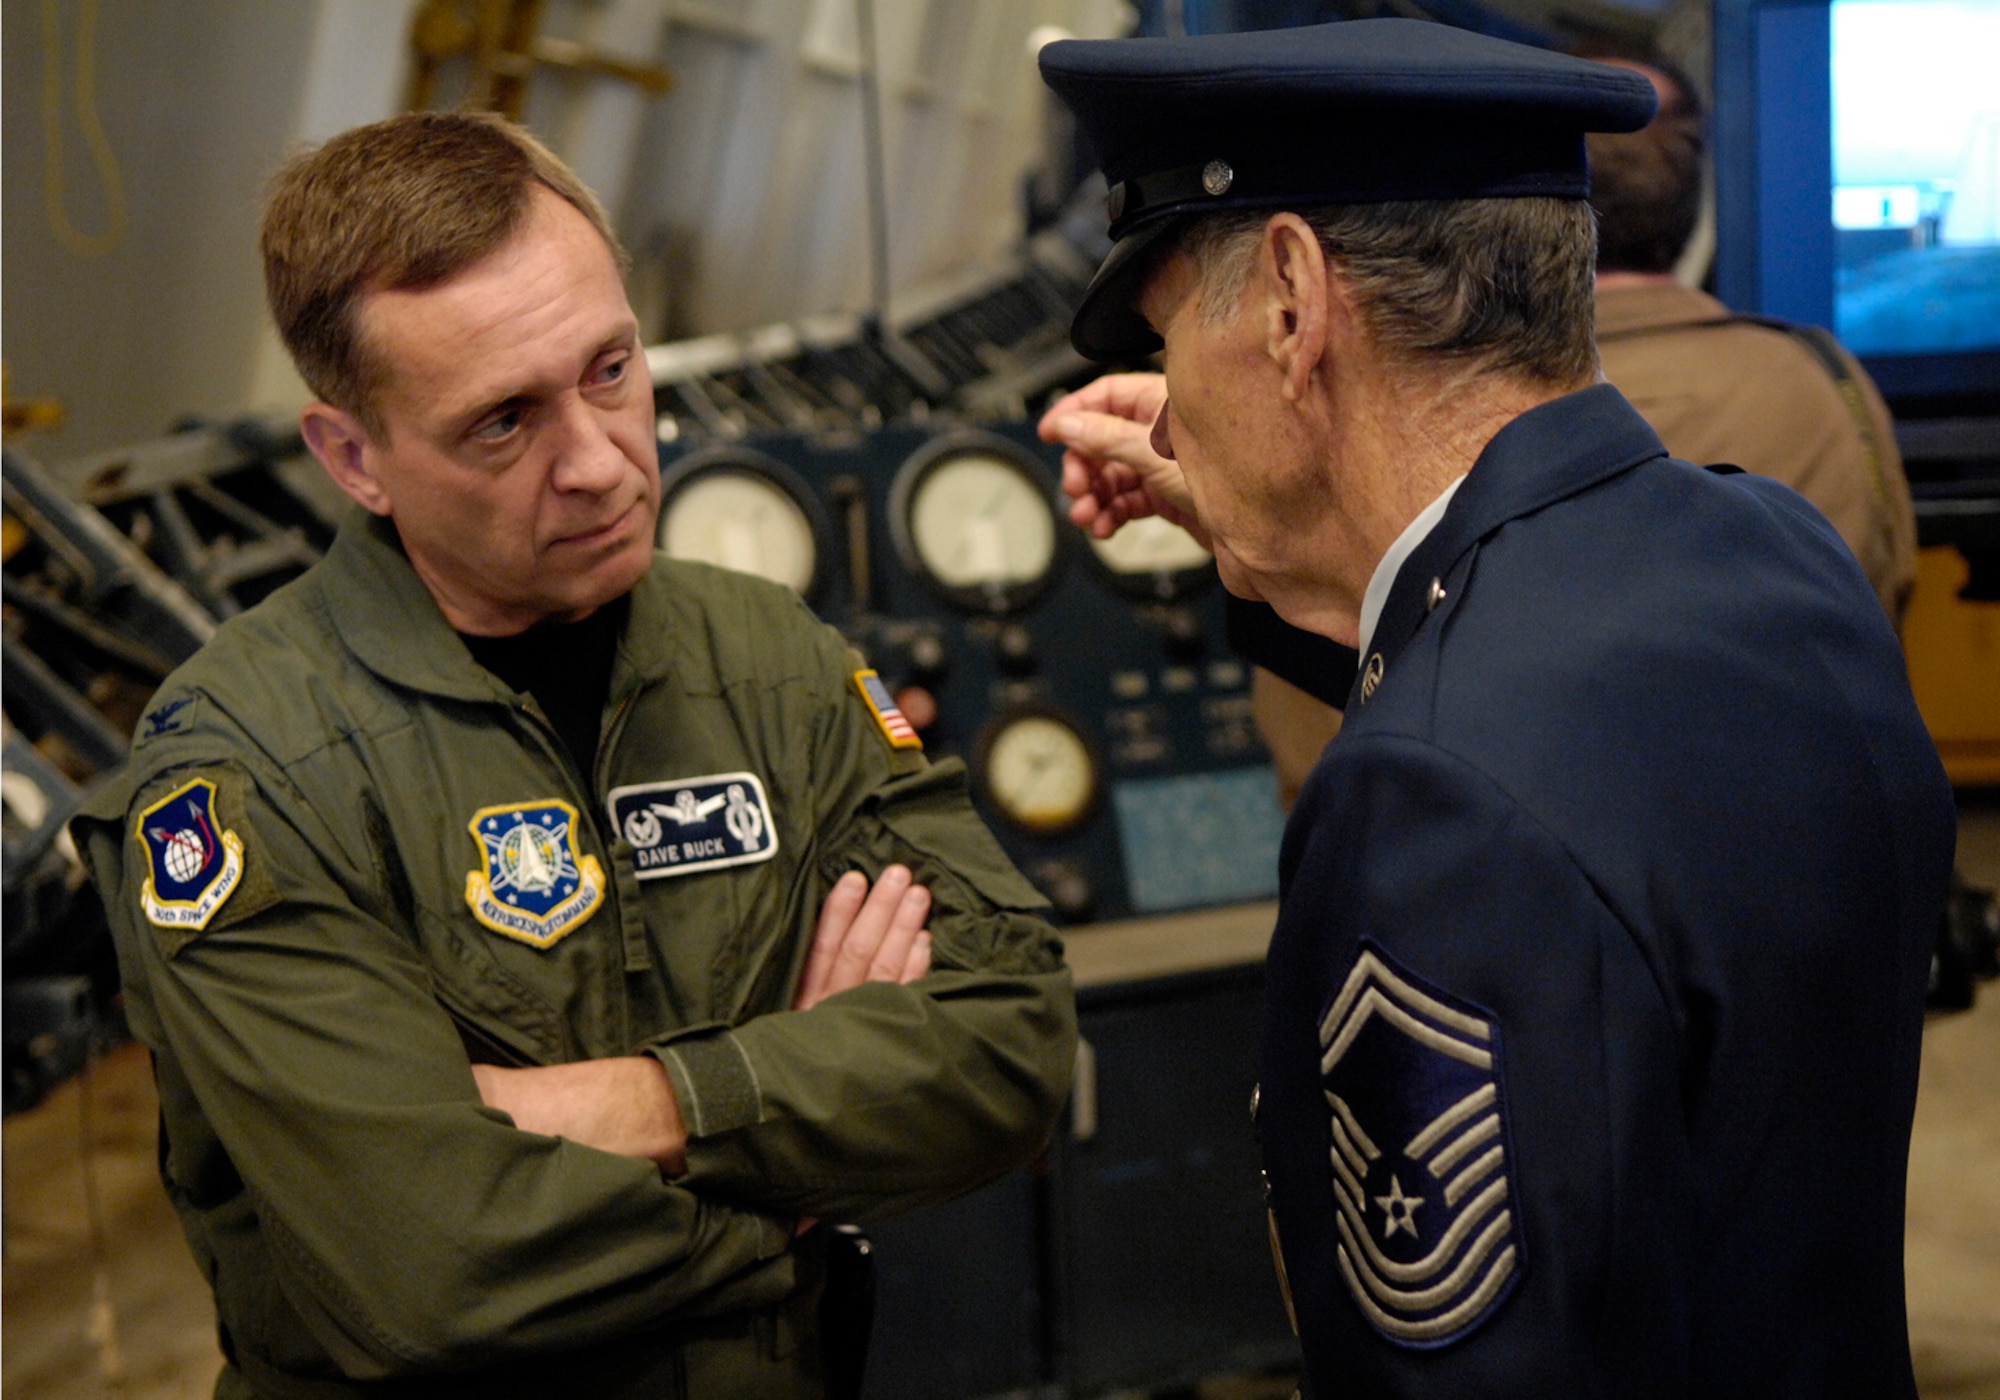 VANDENBERG AIR FORCE BASE, Calif. -- Col. David Buck, 30th Space Wing commander, speaks with Chief Master Sgt. (Ret.) Roy Stovall during the Thor Reunion Tour at the Space Launch Complex 2 on Tuesday. (U.S. Air Force photo/ Airman 1st Class Jonathan Olds) 